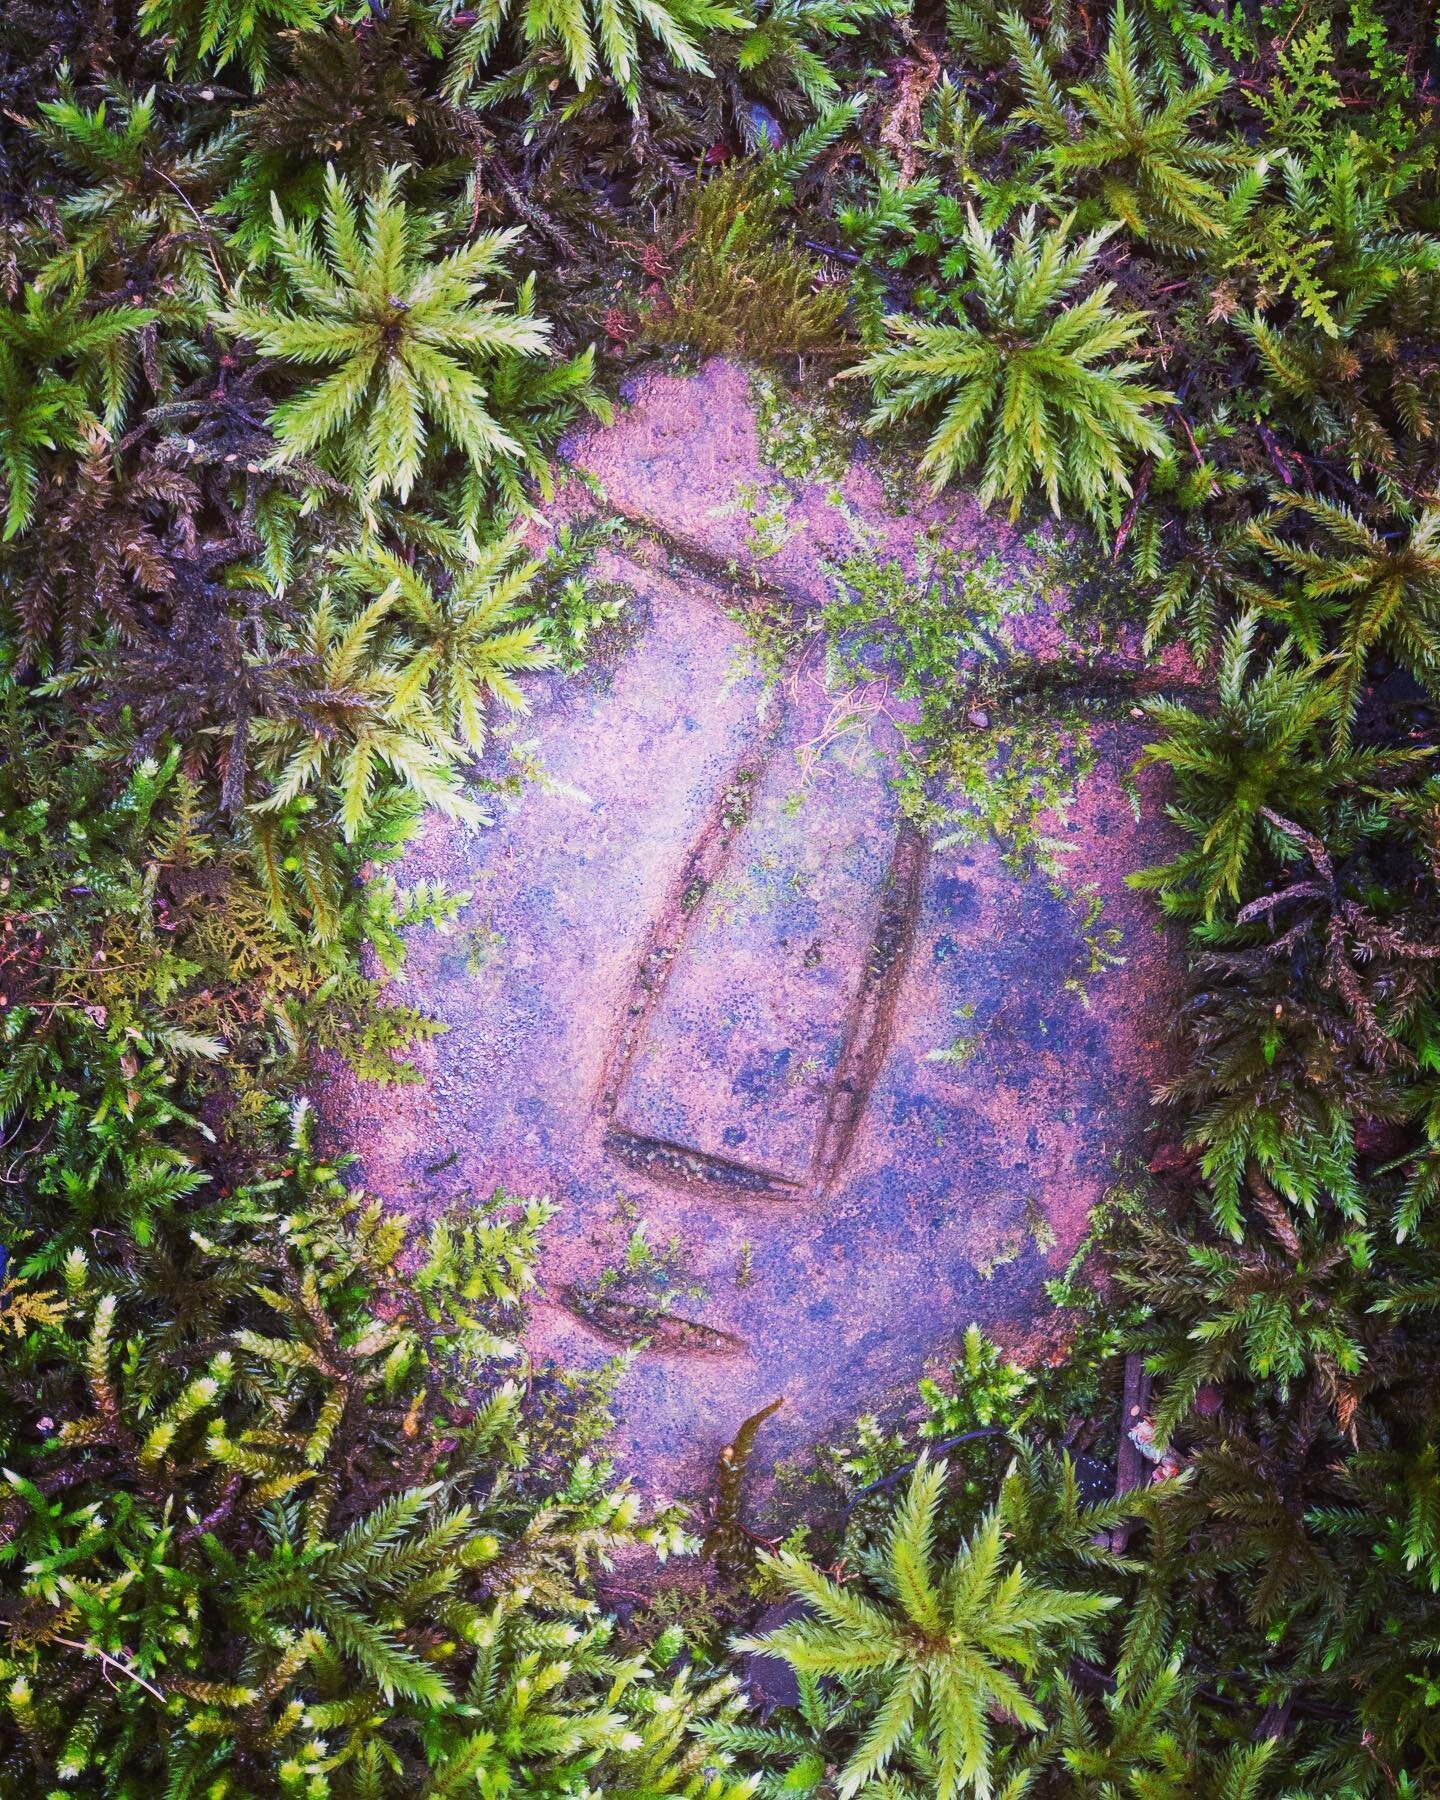 The Man In The Moss. His Moss Hair is ever changing so he needs a trim from time to time. #moss #mossart #face #closeup #saddleridgesanctuary #unitedplantsaversbotanicalsanctuary #nature #bryophyte